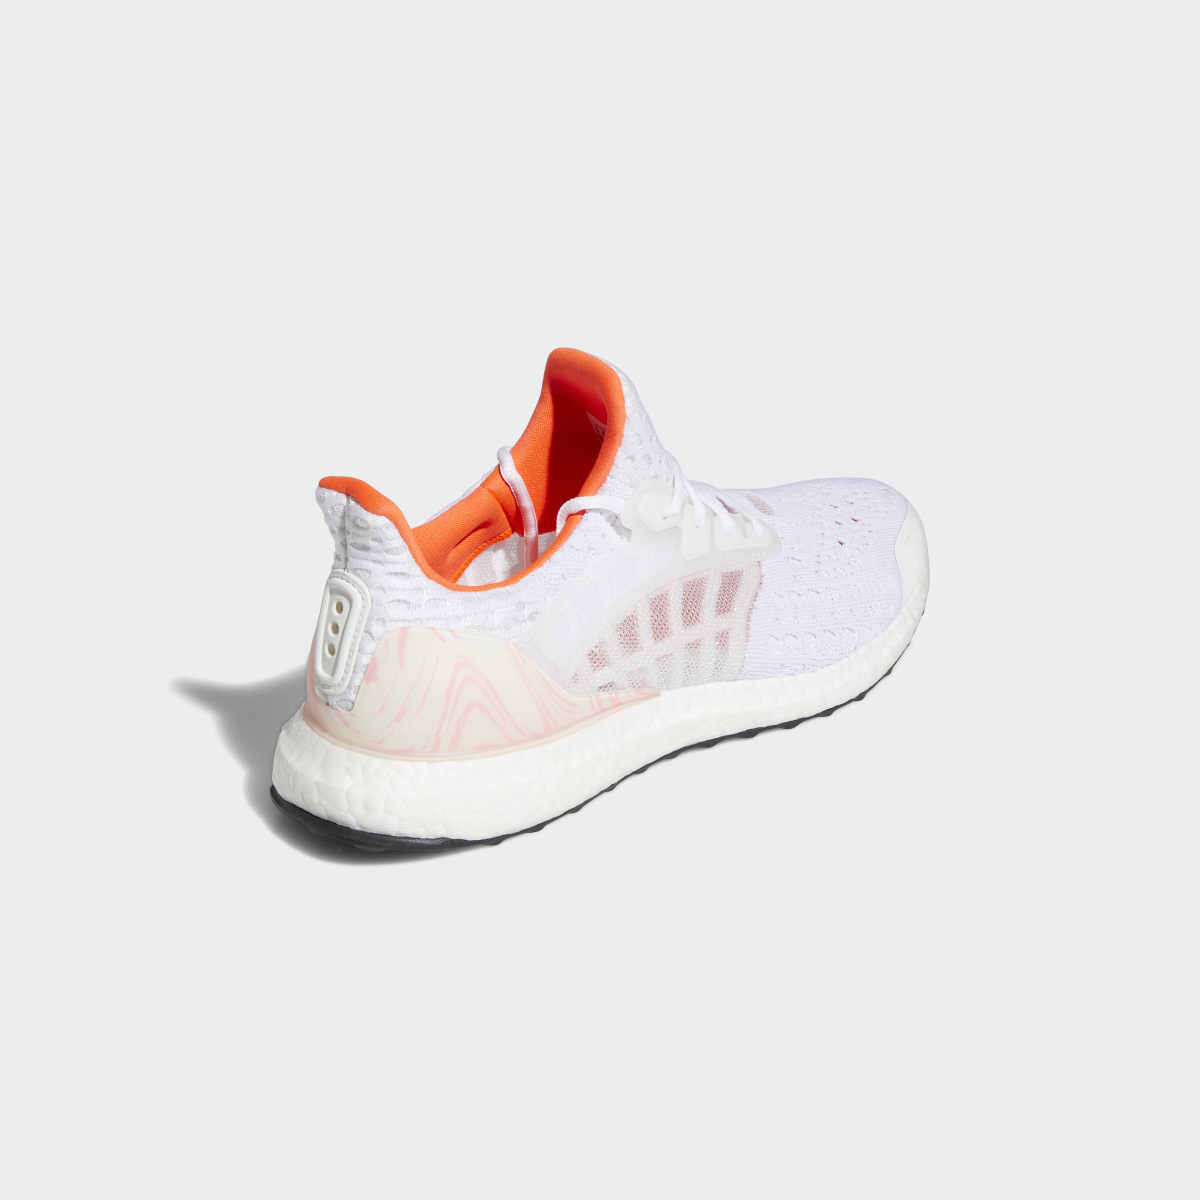 Adidas Ultraboost CC_2 DNA Climacool Running Sportswear Lifestyle Shoes. 9